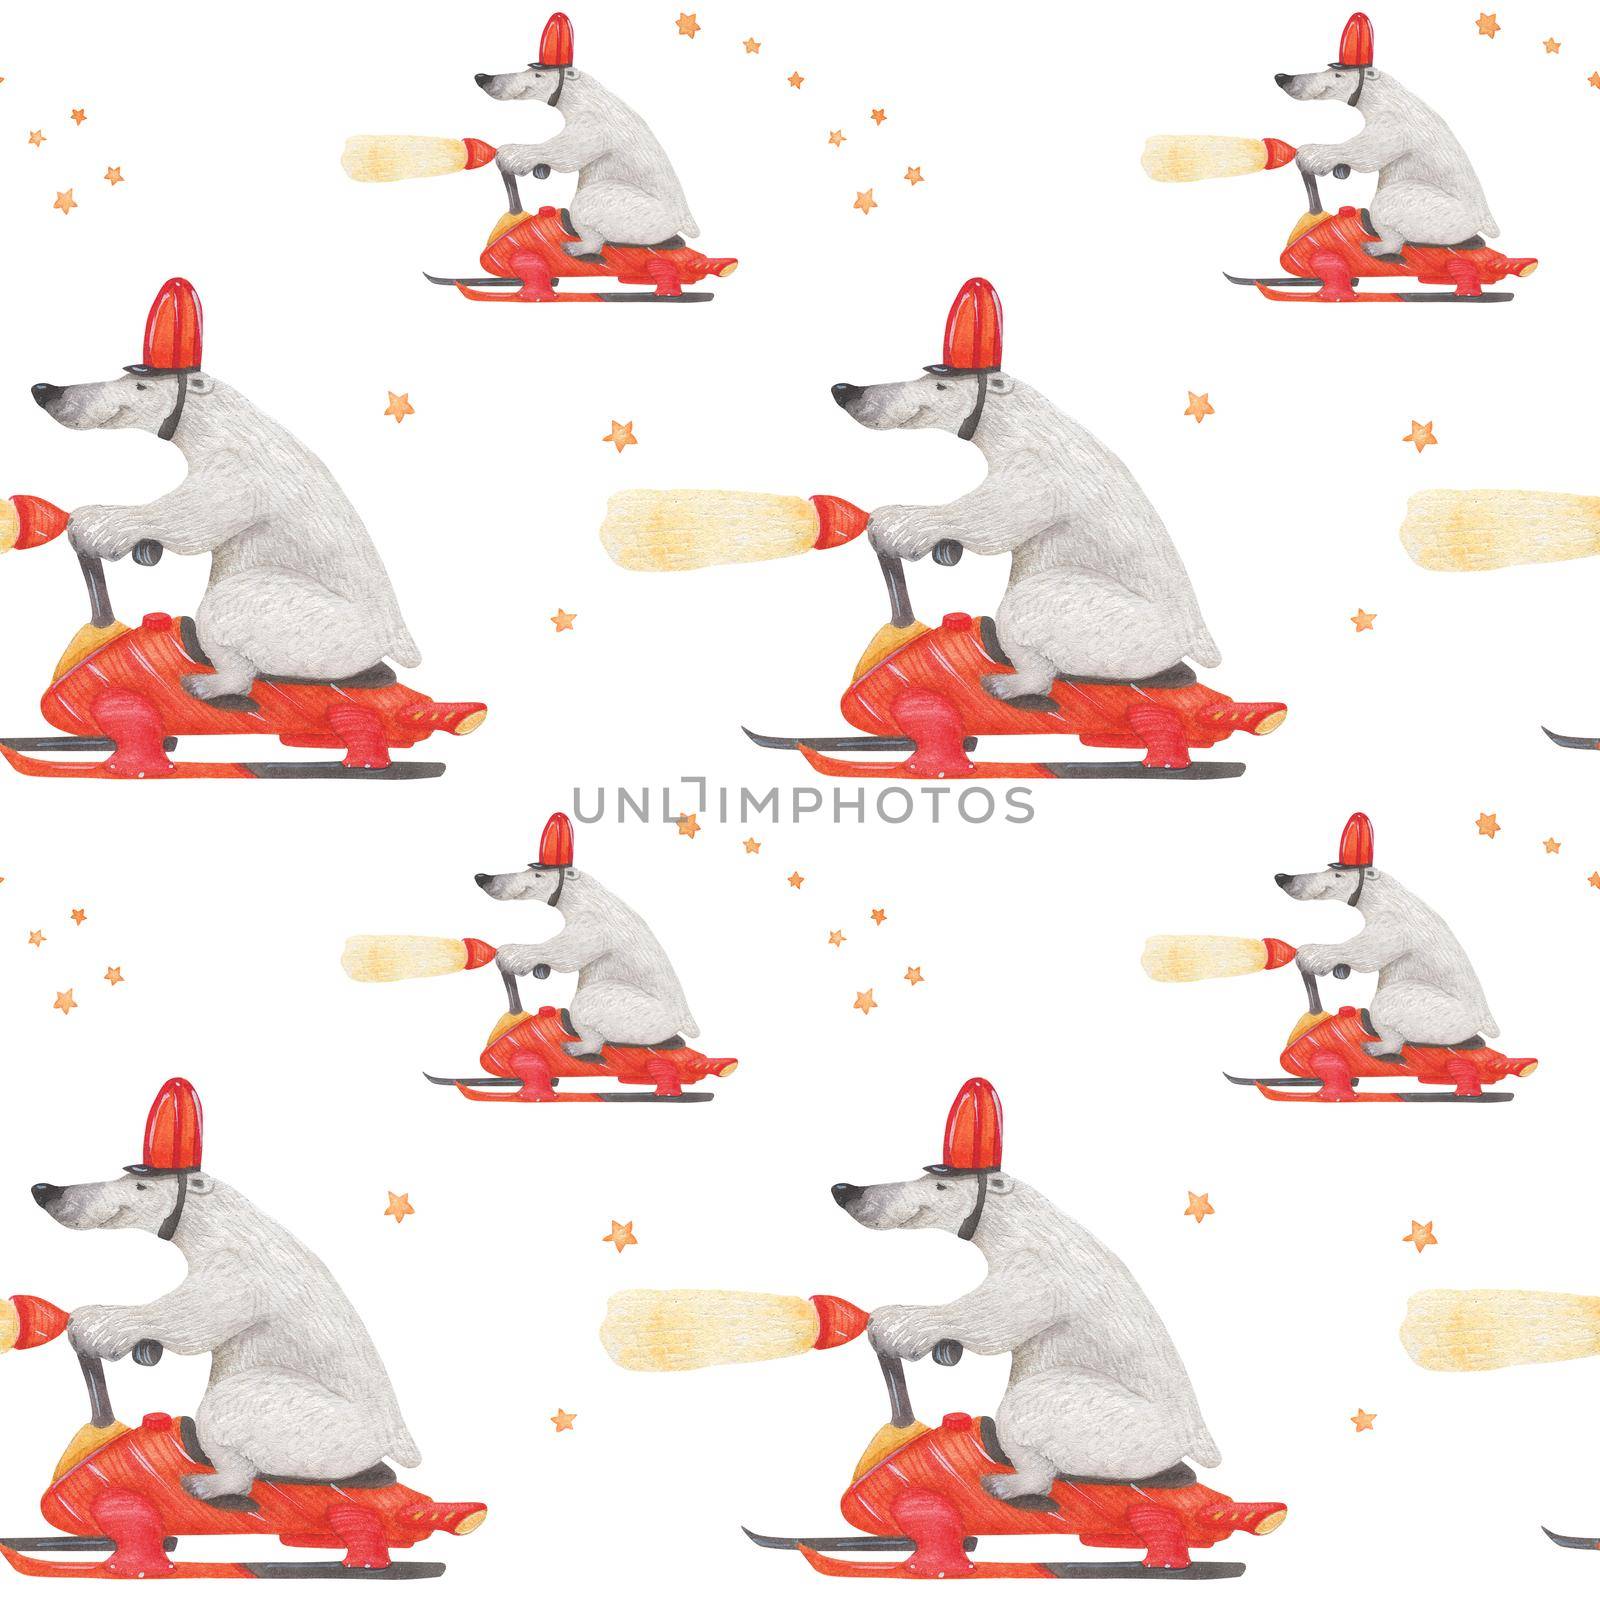 Polar bear rushing snowmobile. Watercolor seamless patterns for textile, wrapping paper and any tiled design. White background, clipping path uncluded